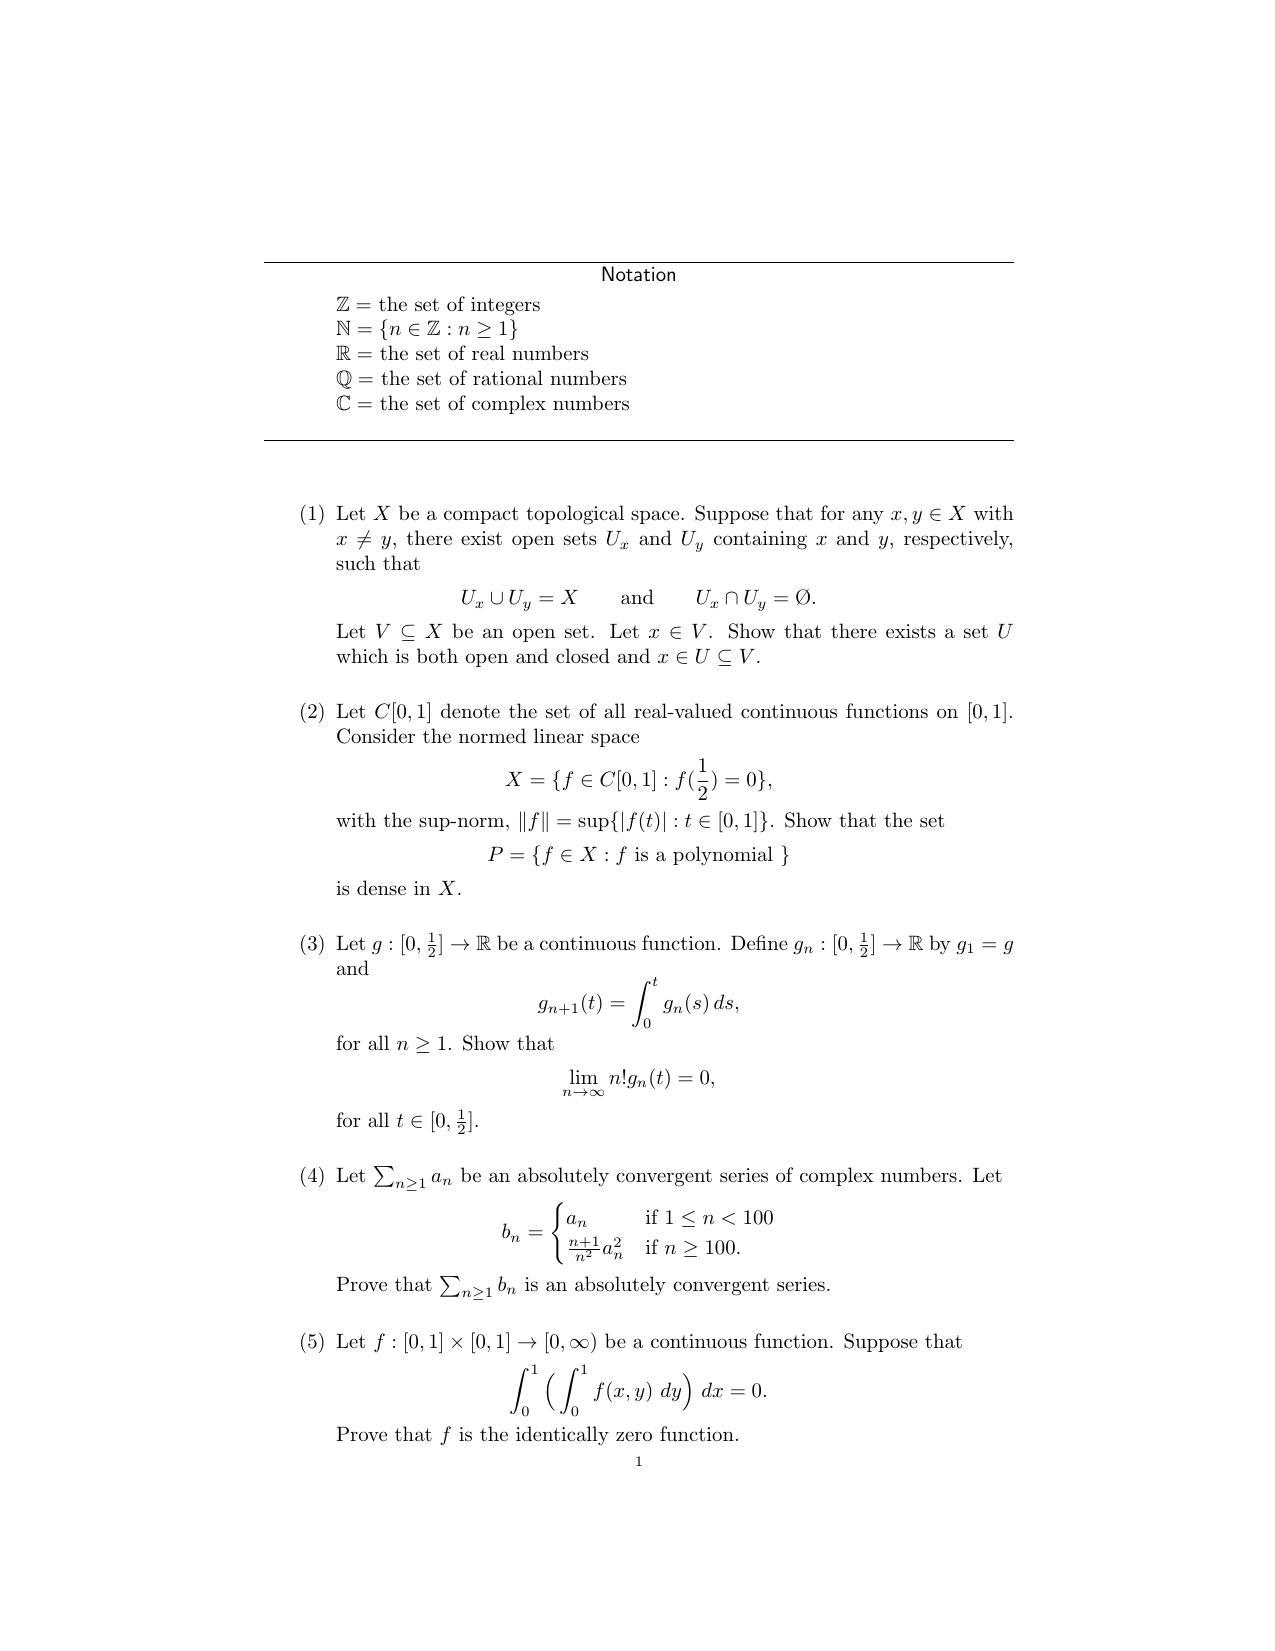 ISI Admission Test JRF in Mathematics MTA 2018 Sample Paper - Page 1